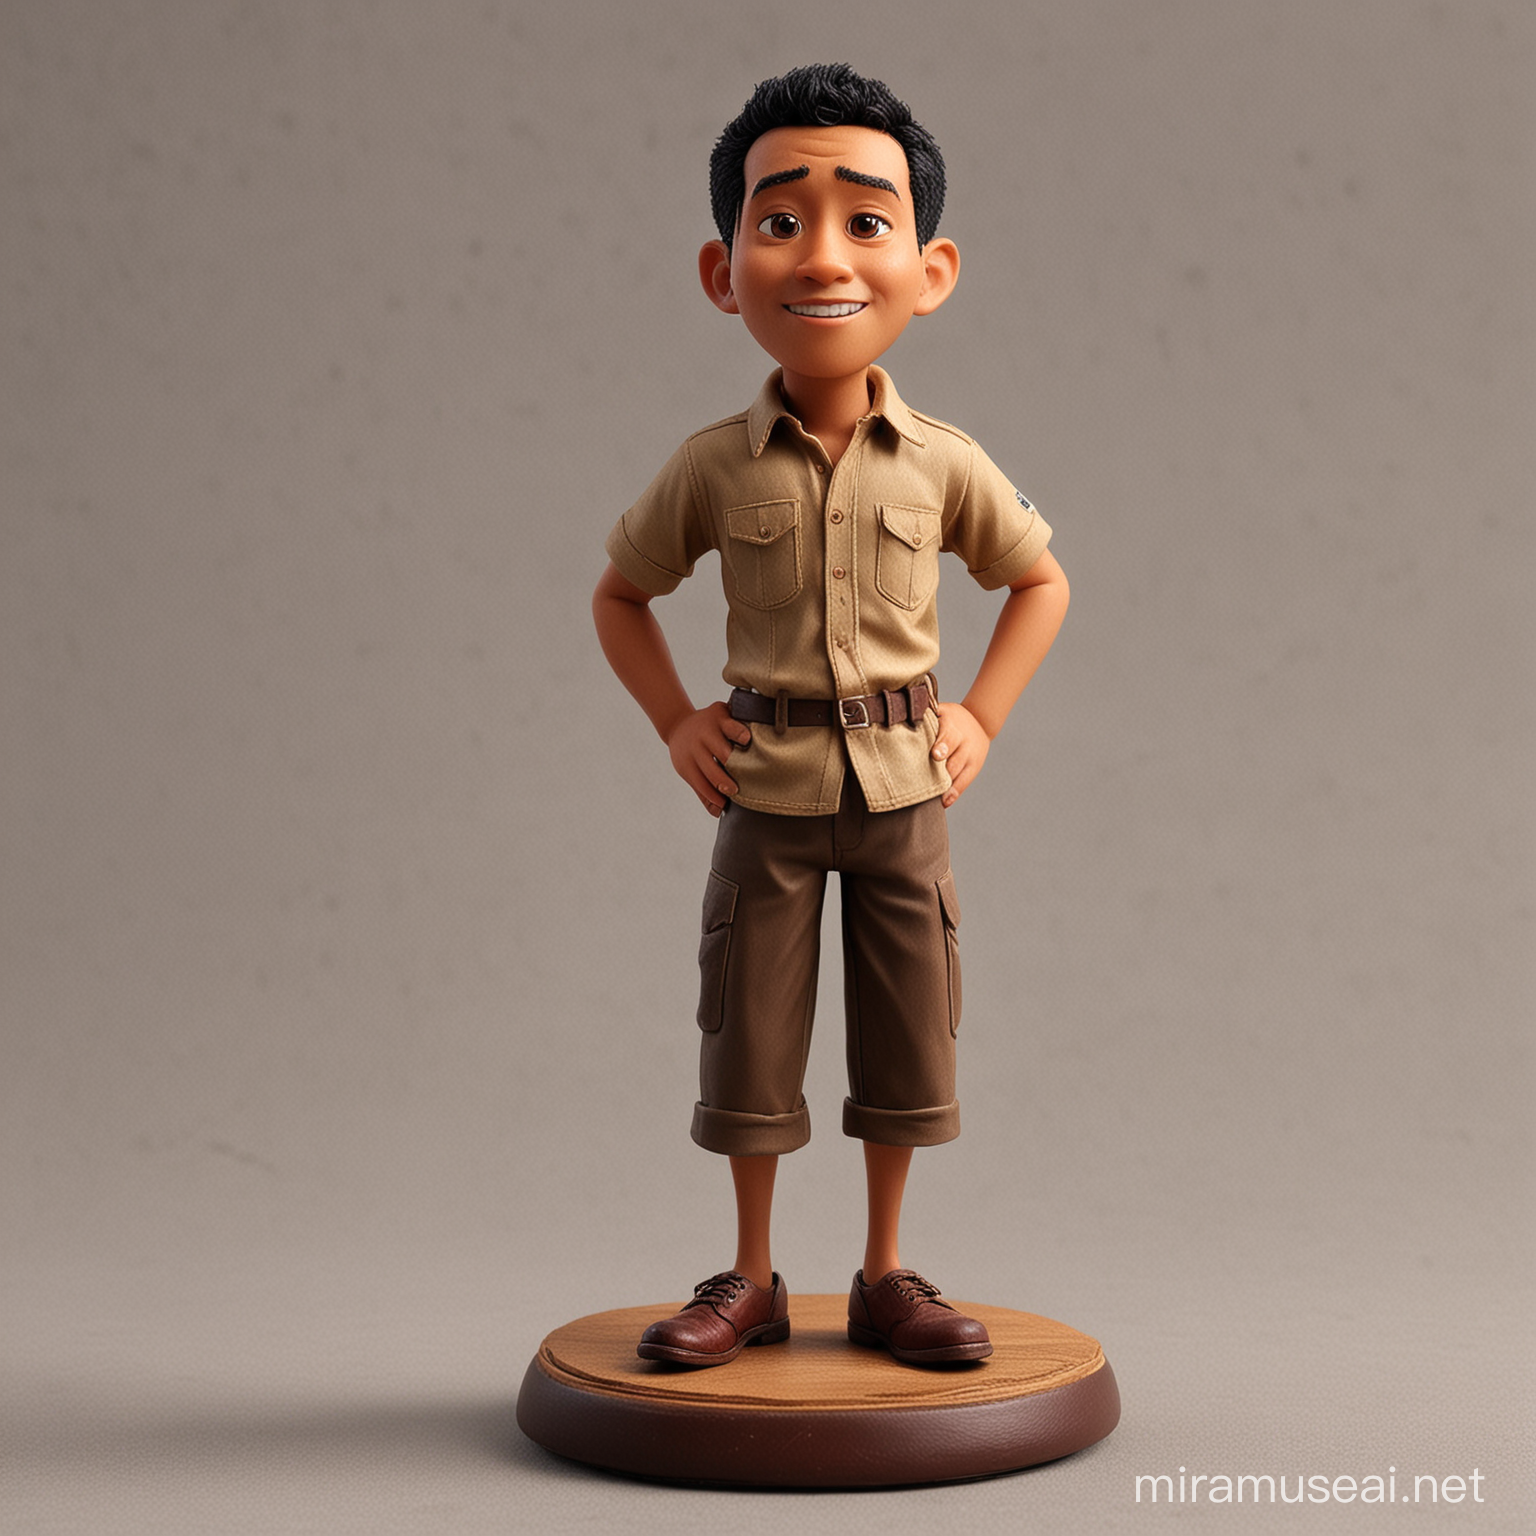 Miniature Indonesian Pixar Character Standing on Table Realistic 3D Rendering